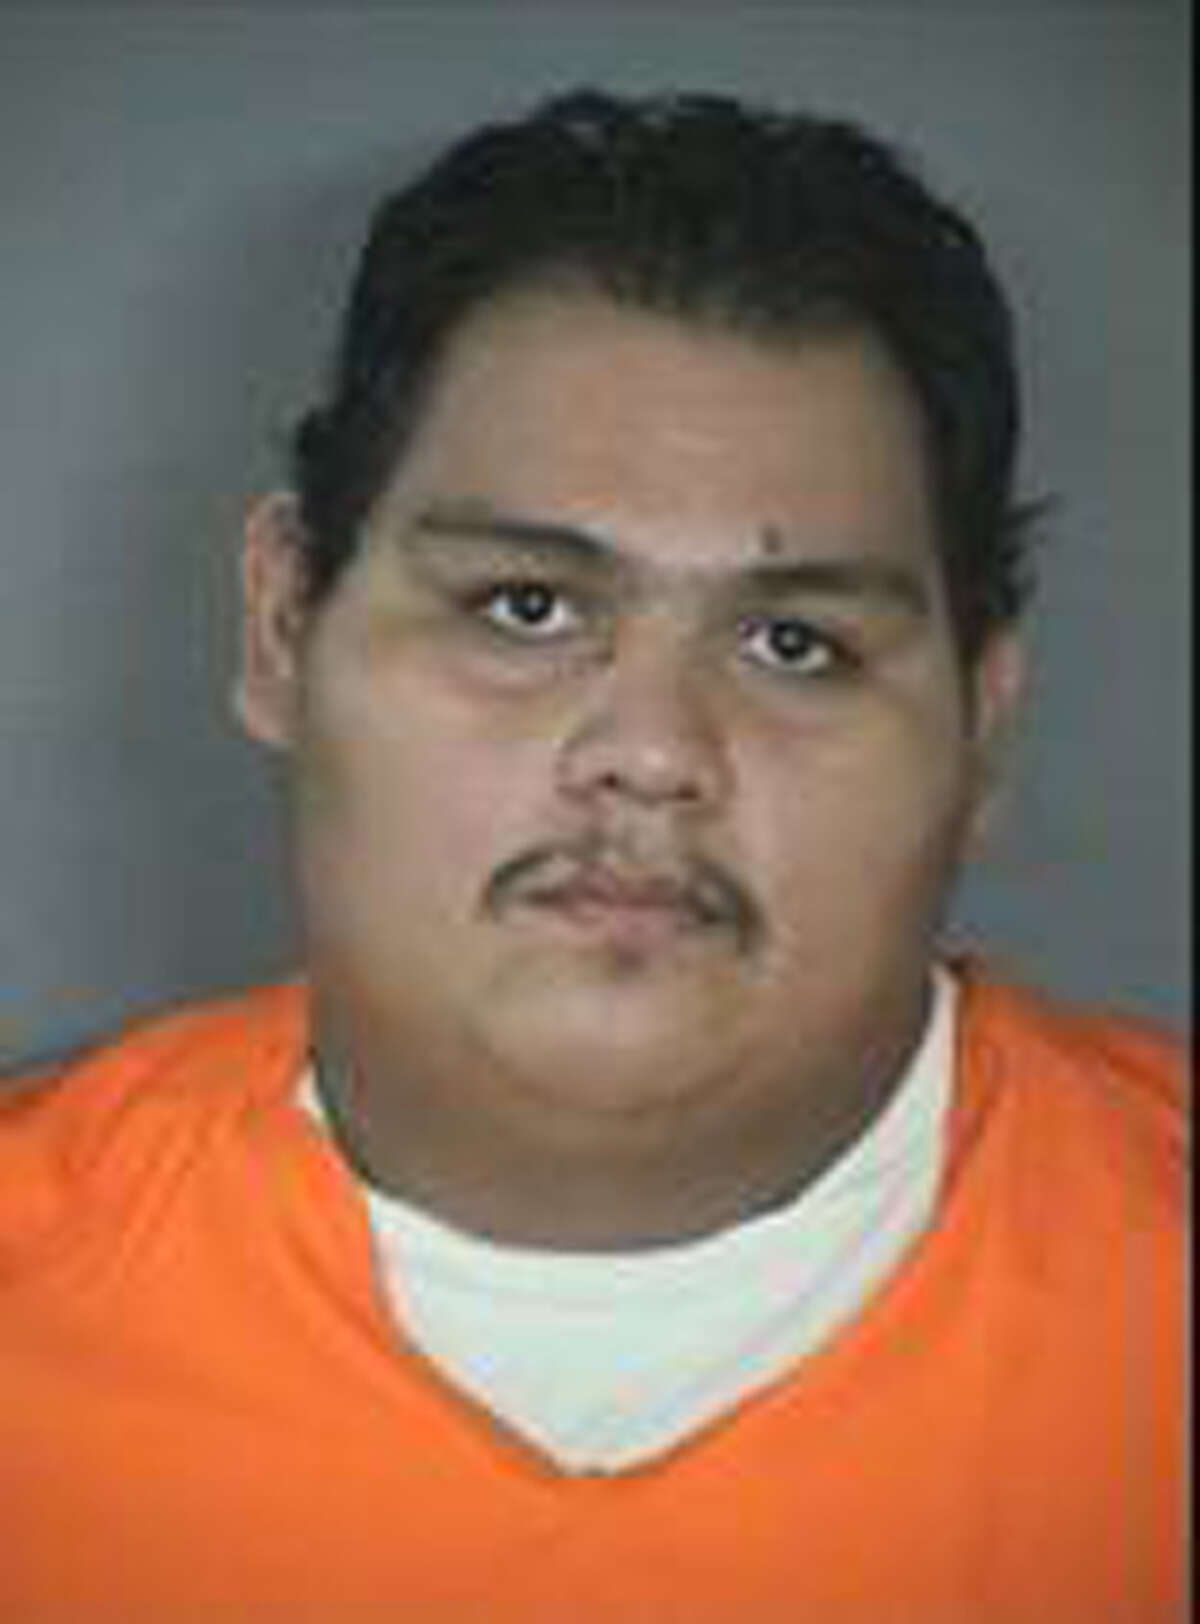 Bernando Crisanto, 25, who is wanted in connection with the fatal beating of Juan Romero, 41, on Monday, Oct. 15, 2012. Courtesy/San Antonio Police Department